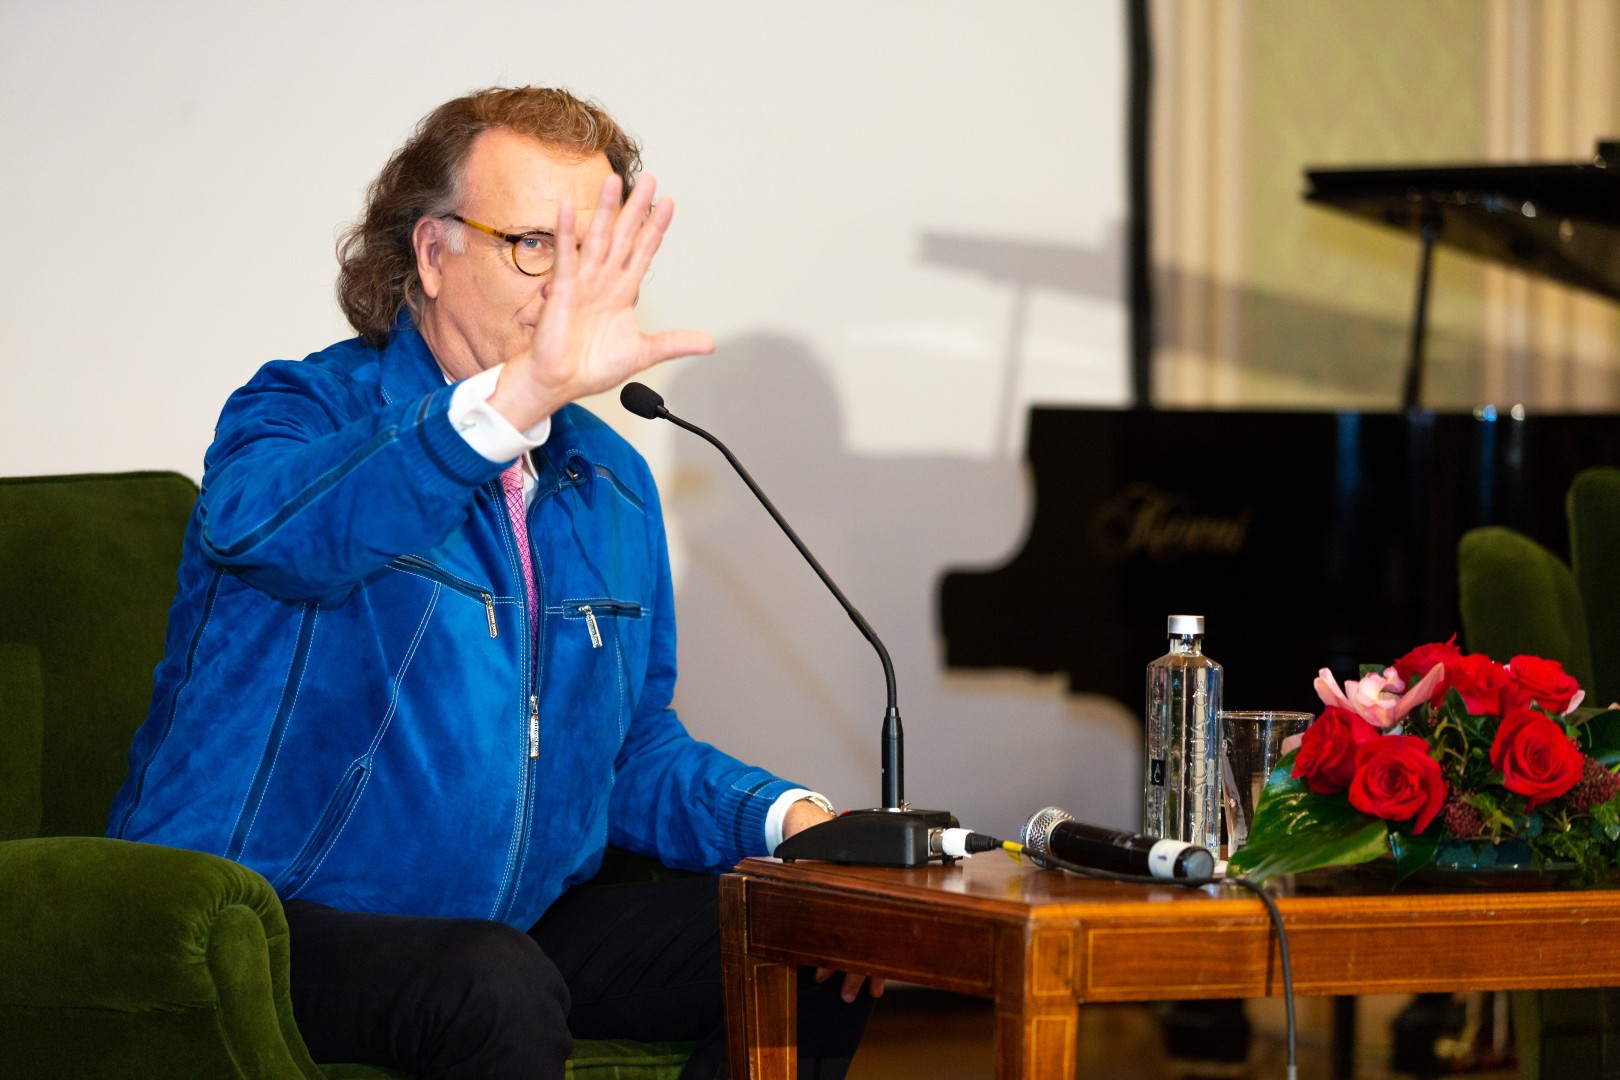 André Rieu at Ateneul Român in Bucharest on December 9, 2014 (140e7fbe3a)